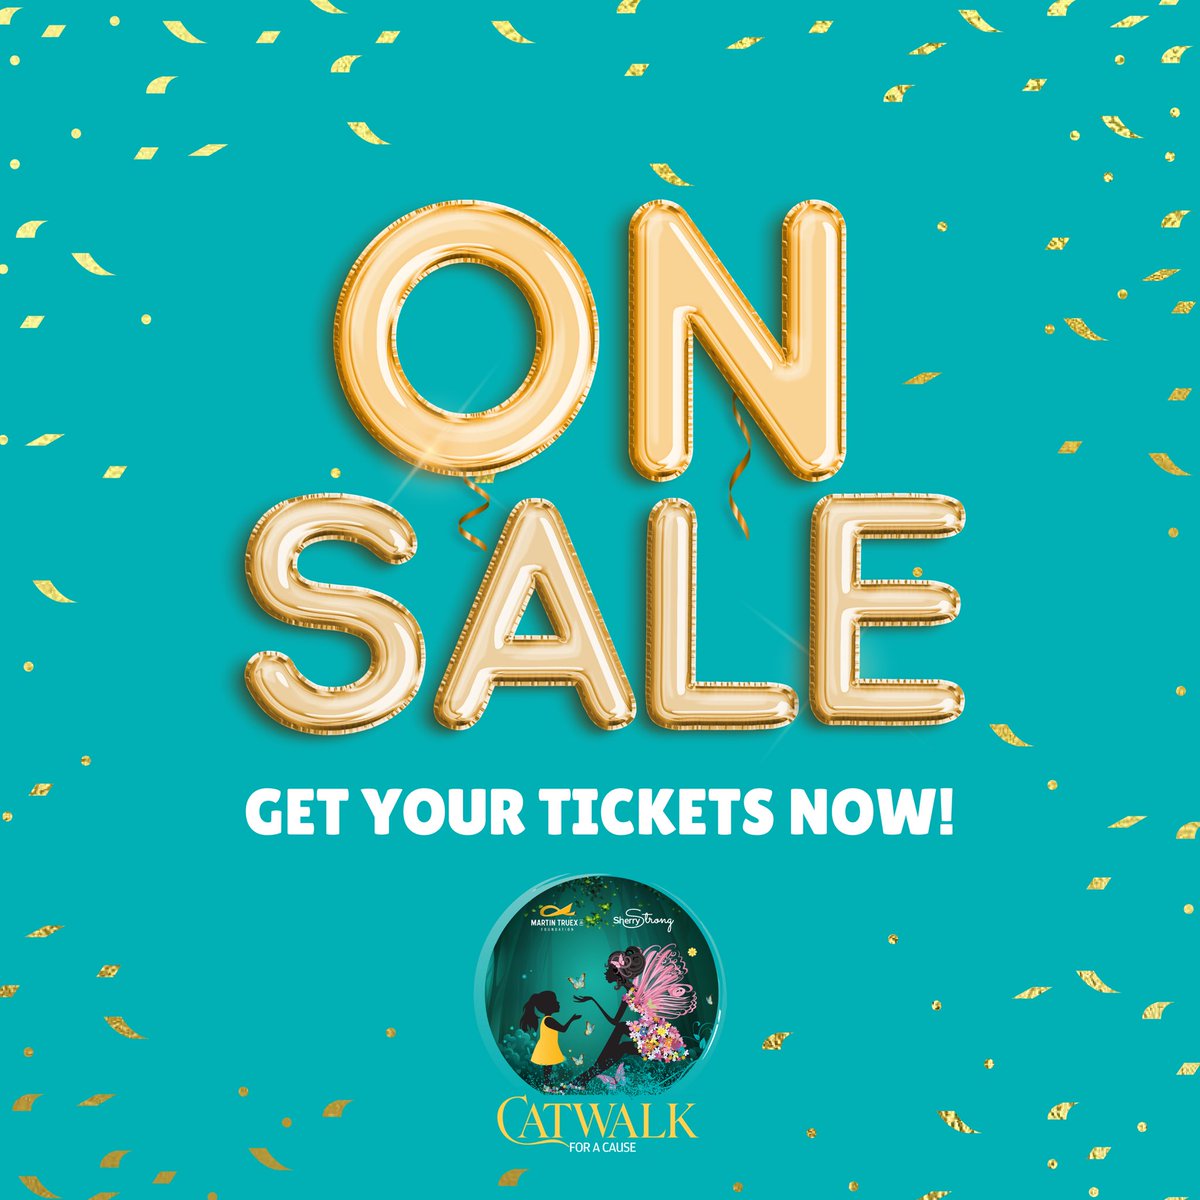 It’s time❕ Grab your 2024 Catwalk for a Cause tickets NOW✨ We are doing a limited amount of tickets, so they will go fast! To purchase: app.donorview.com/znQjN If interested in sponsorship opportunities, email lisa@martintruexjrfoundation.org